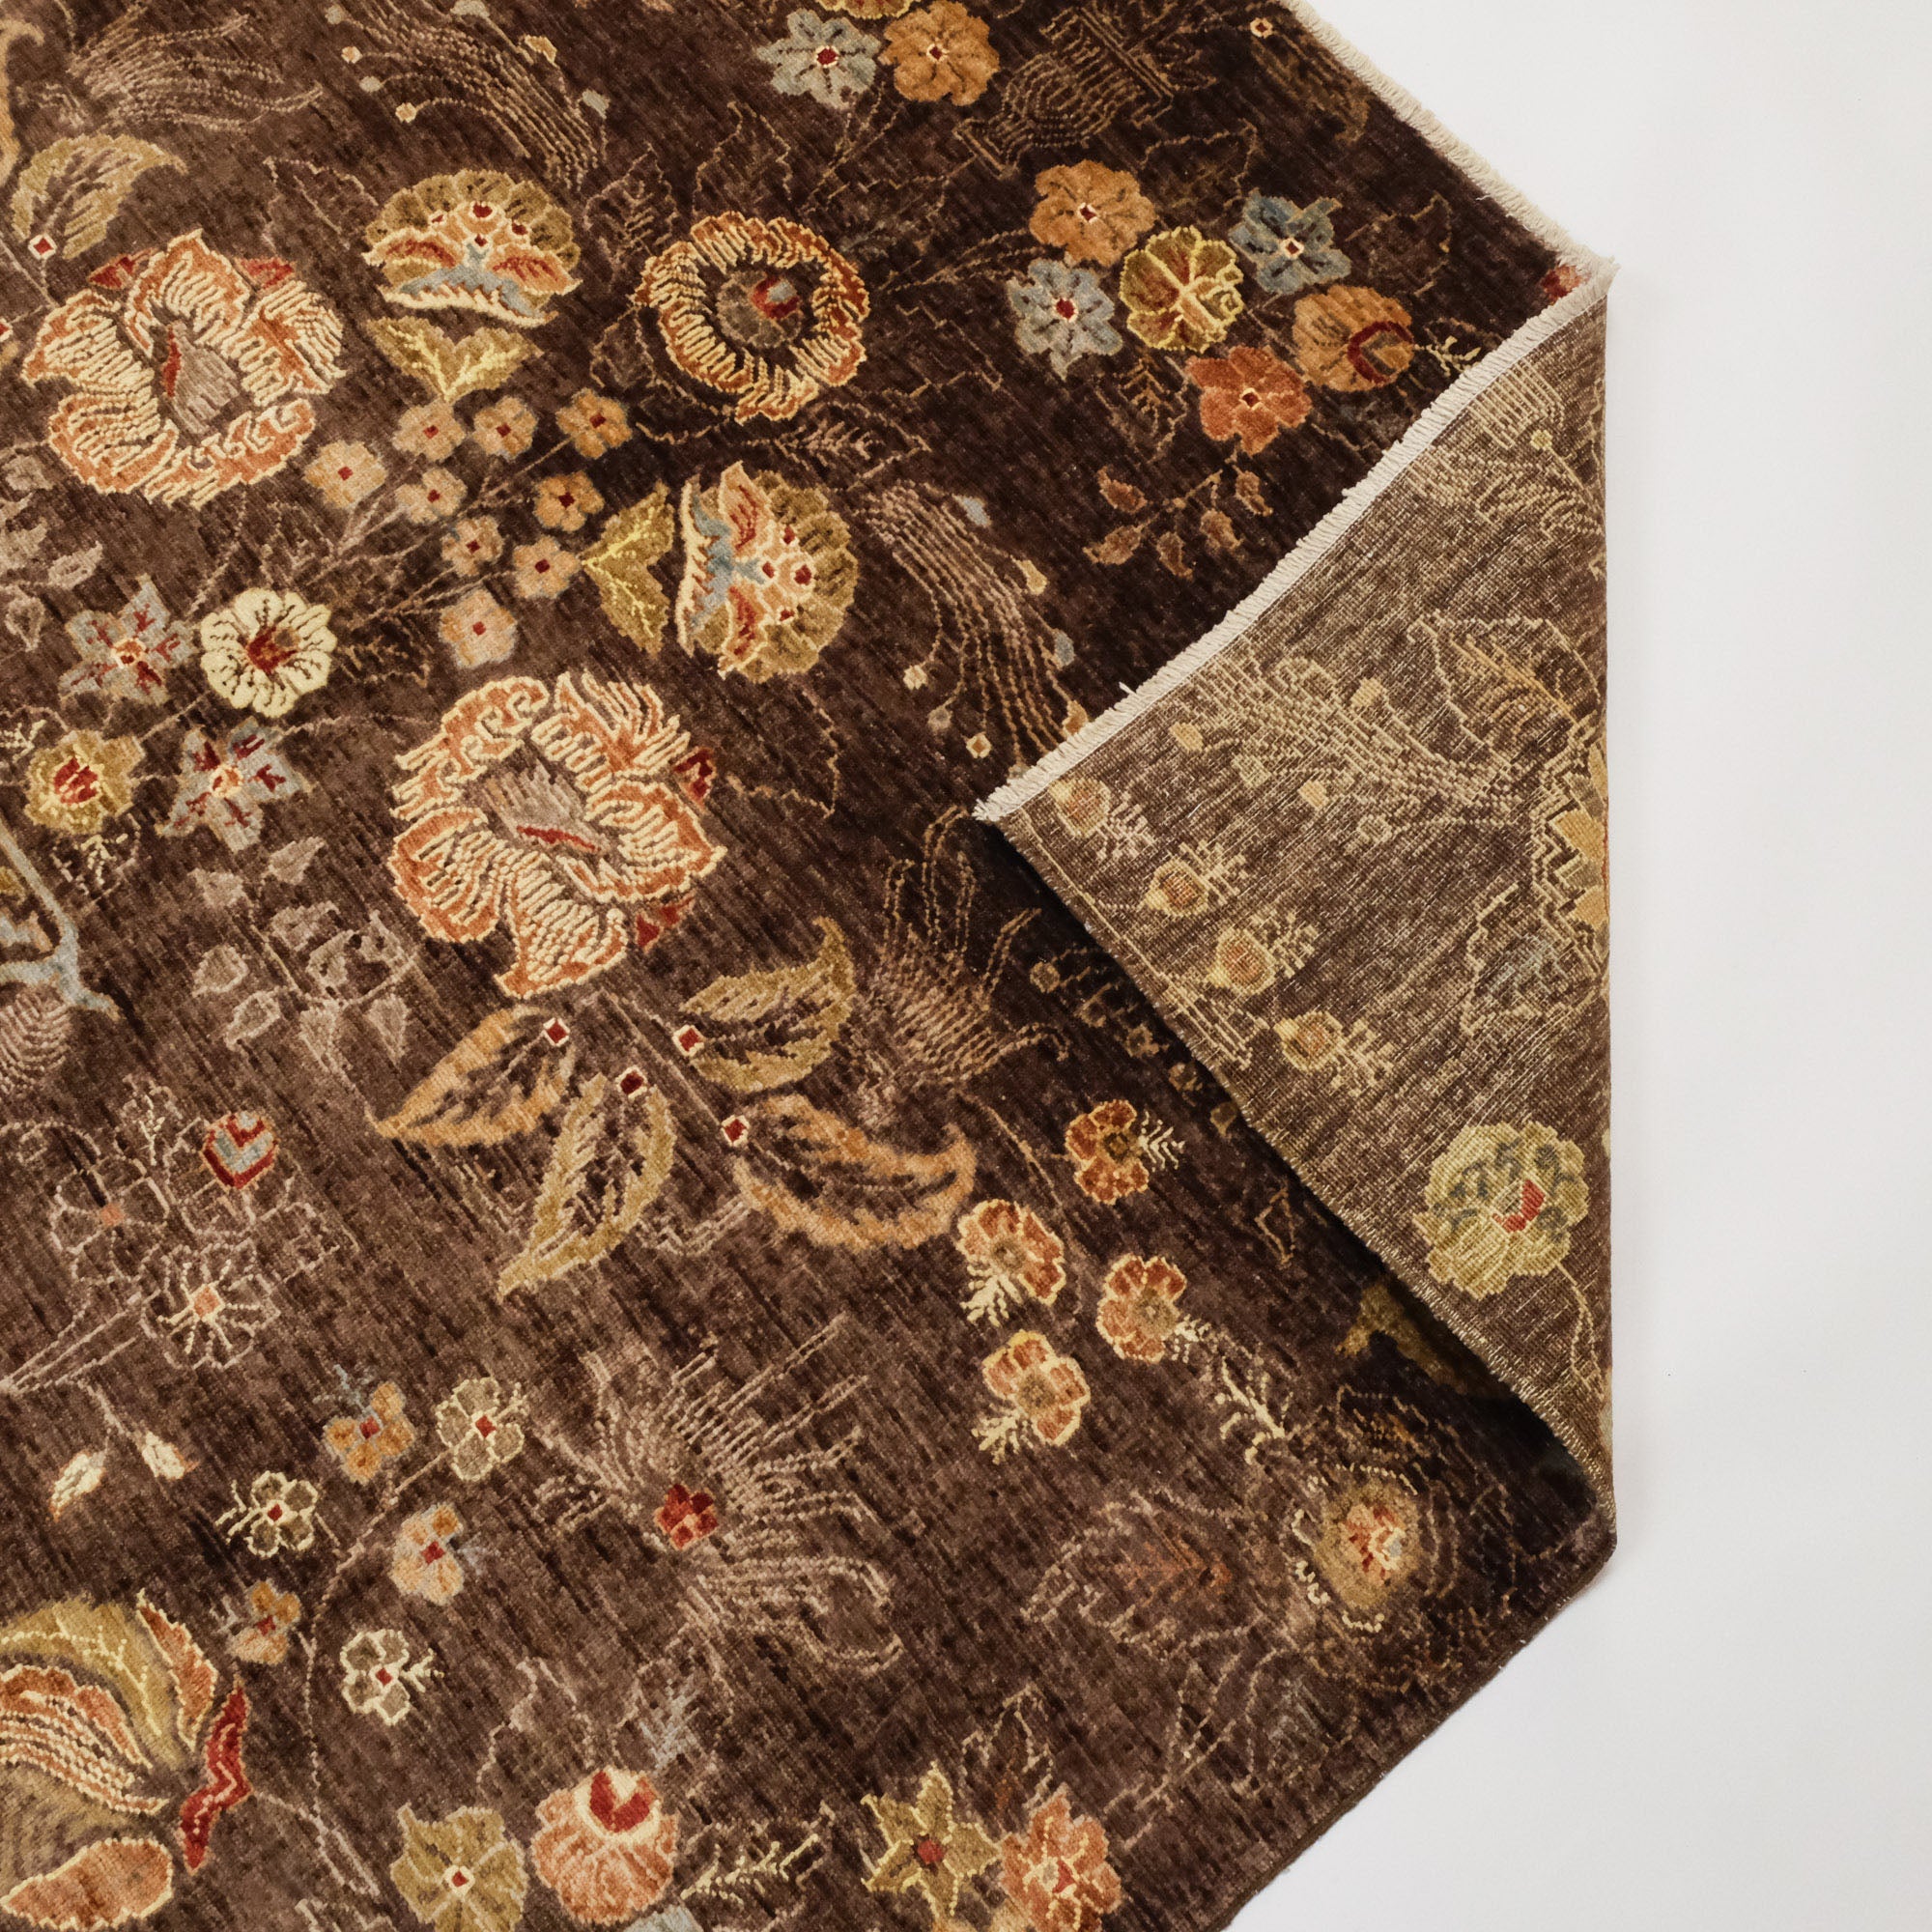 Hand-Woven Flower Patterned Brown Wool Carpet